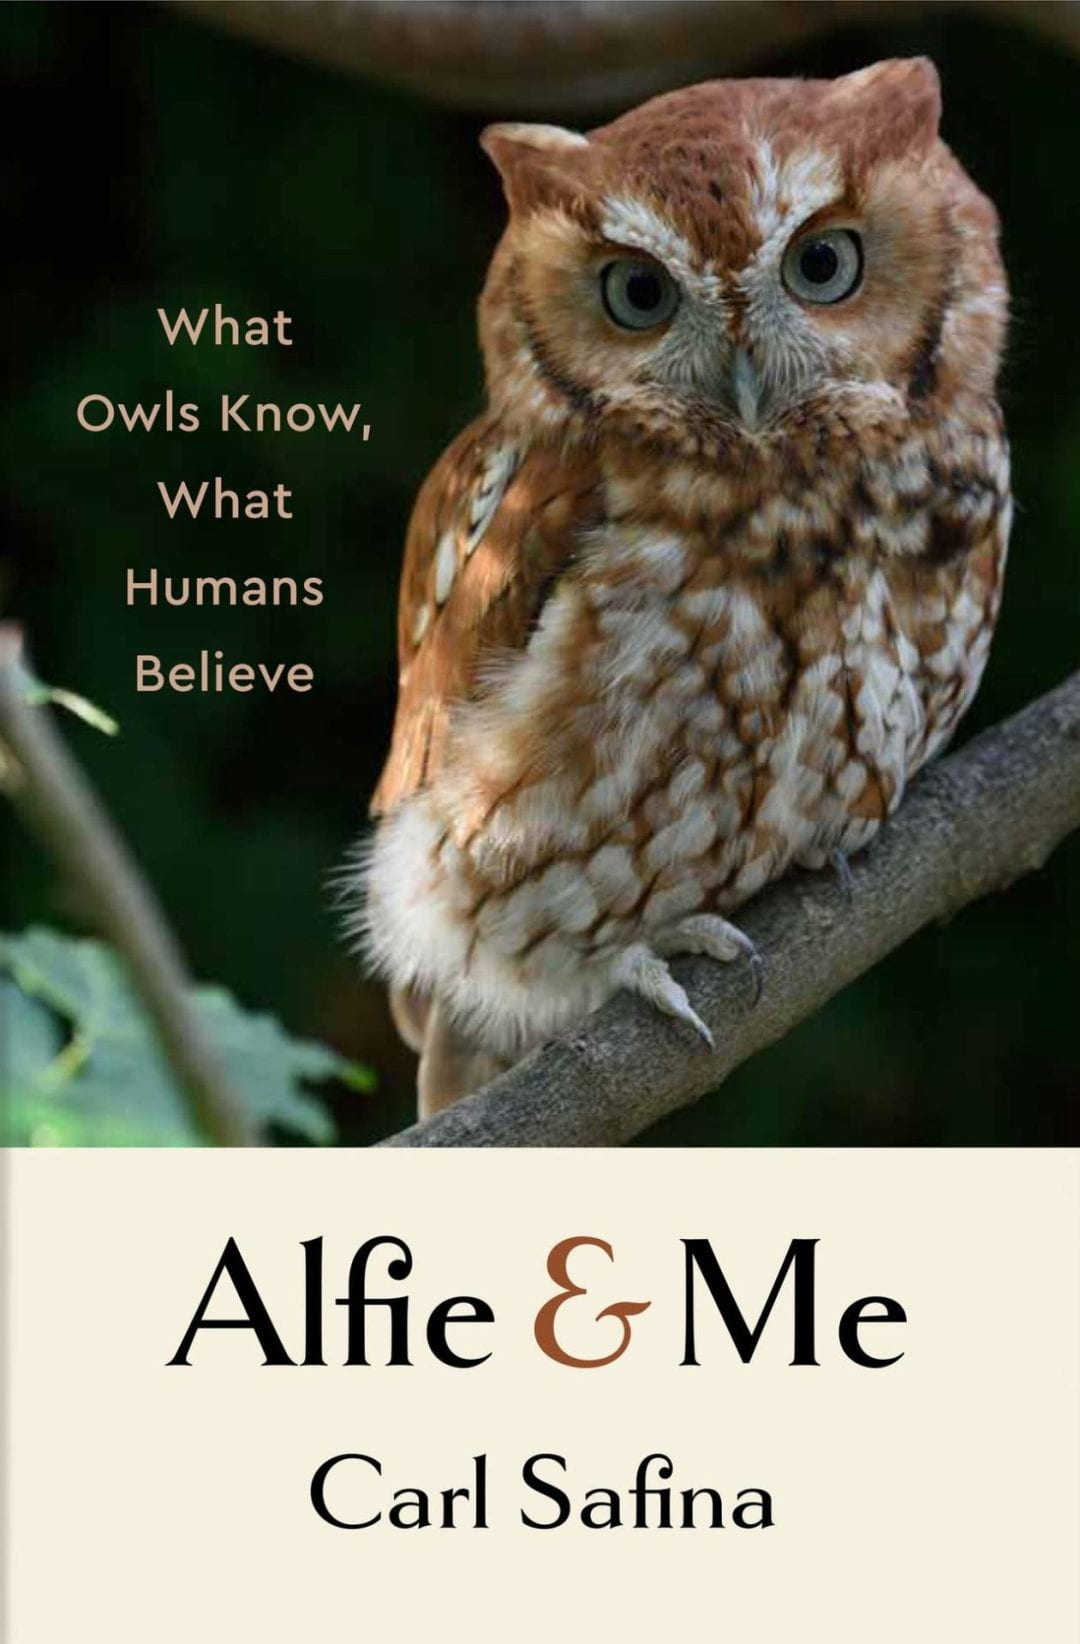 Safina, C. (2023). Alfie & me: What owls know, what humans believe (First edition.). New York: W. W. Norton & Company.